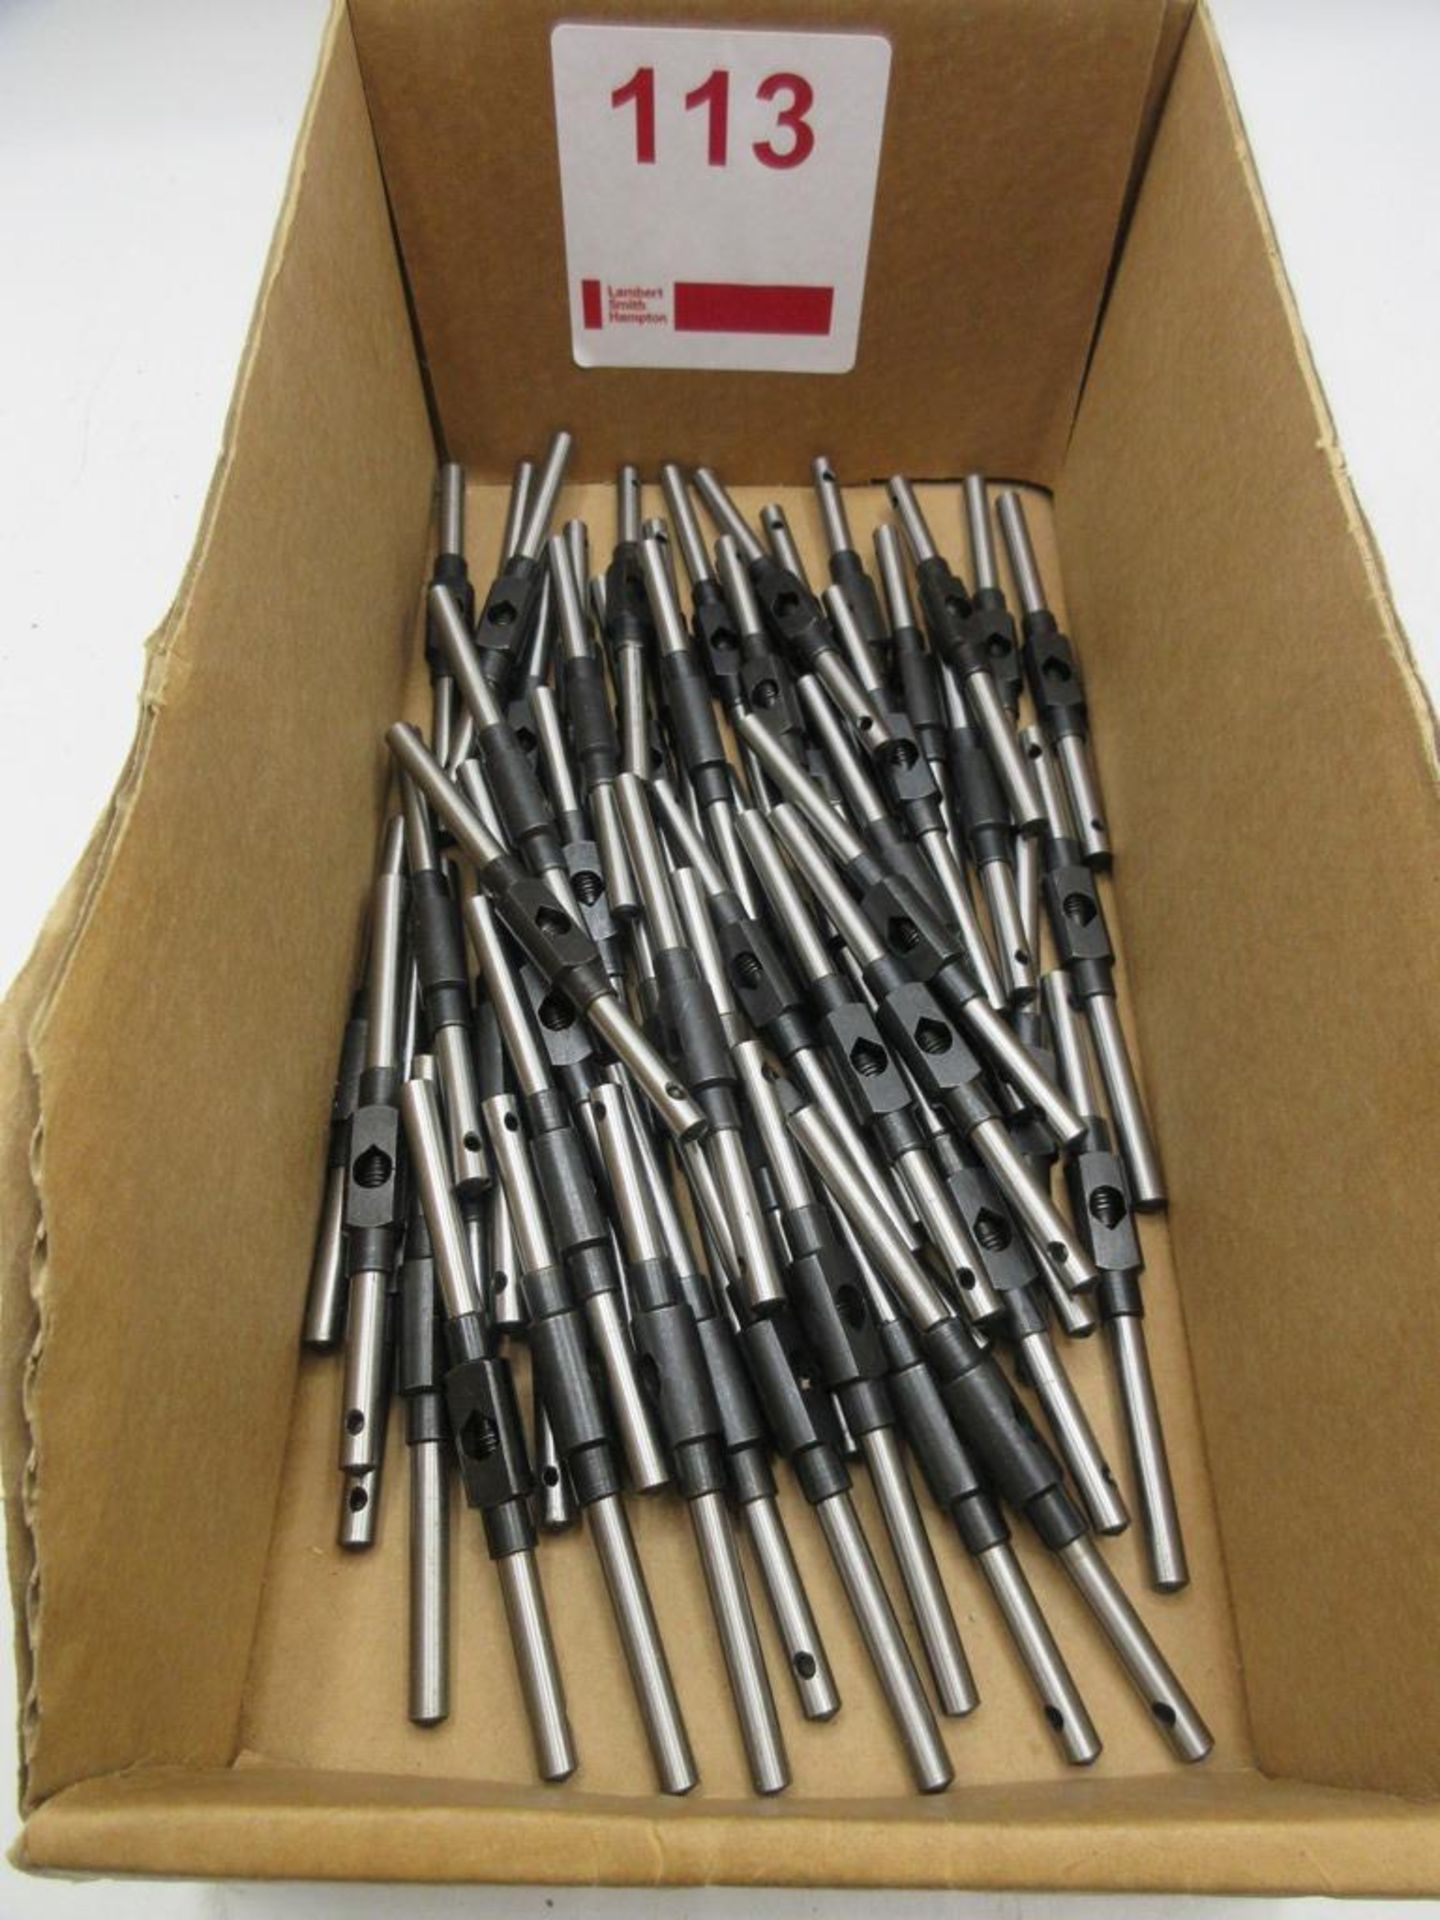 Sixty small tap wrenches